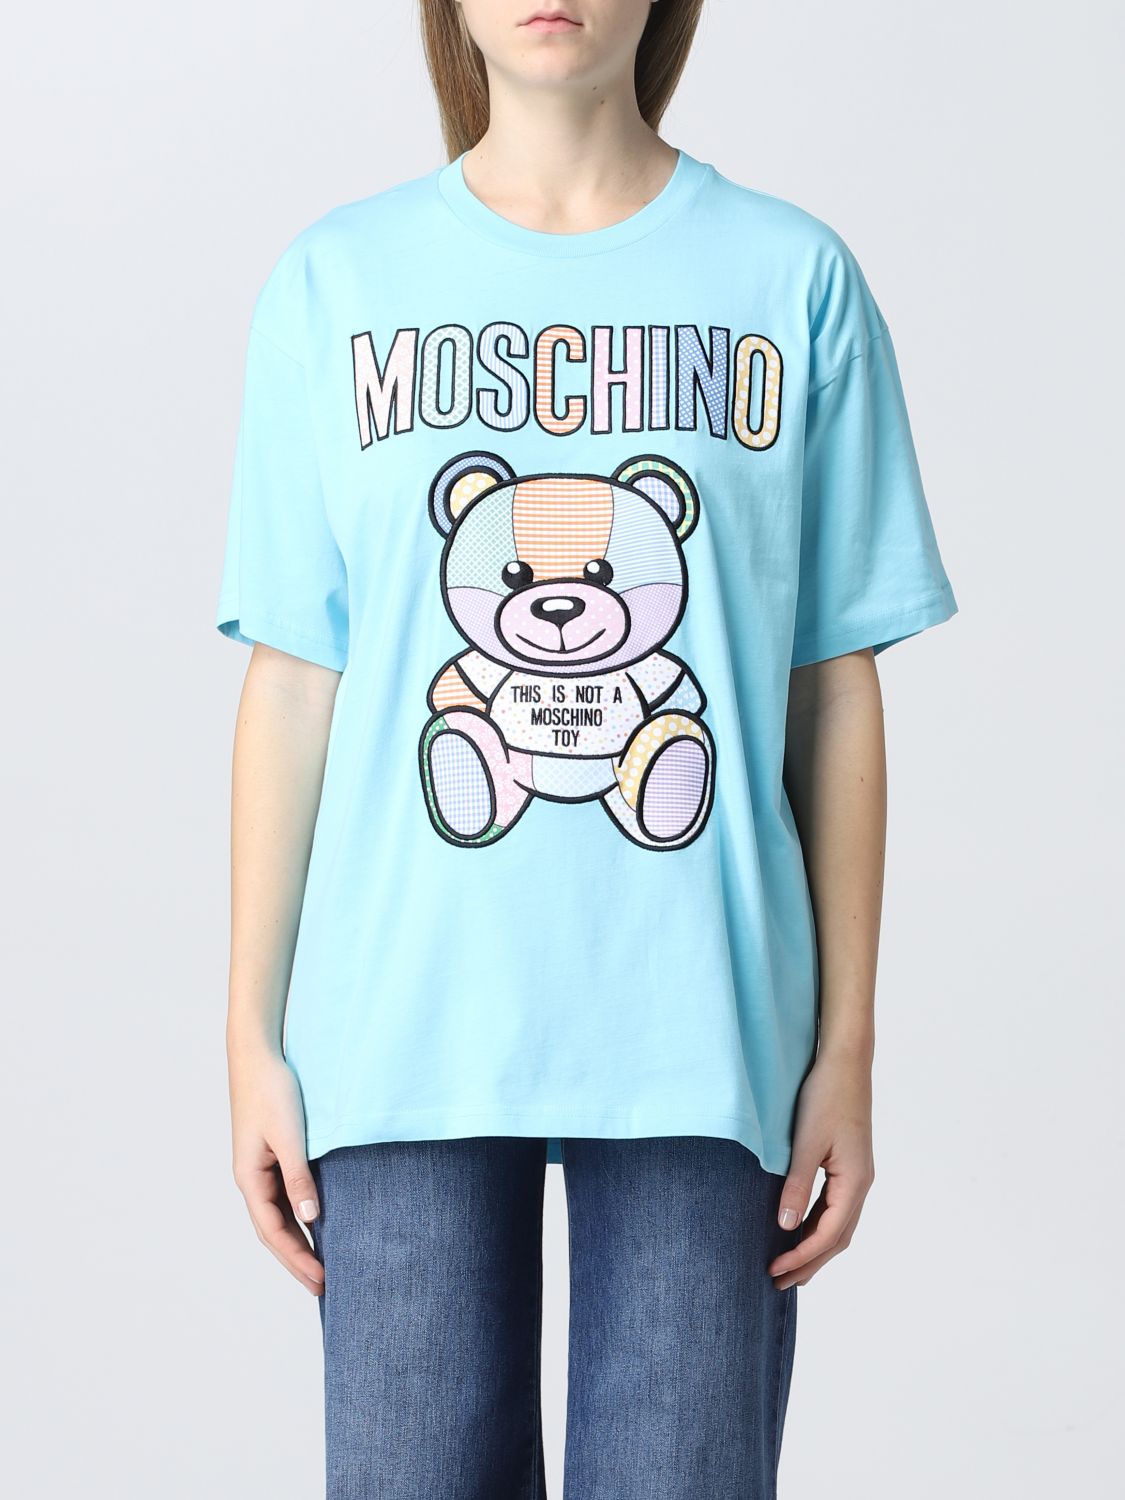 MOSCHINO COUTURE: T恤女士- 浅蓝色| T恤Moschino Couture 07070441 GIGLIO.COM